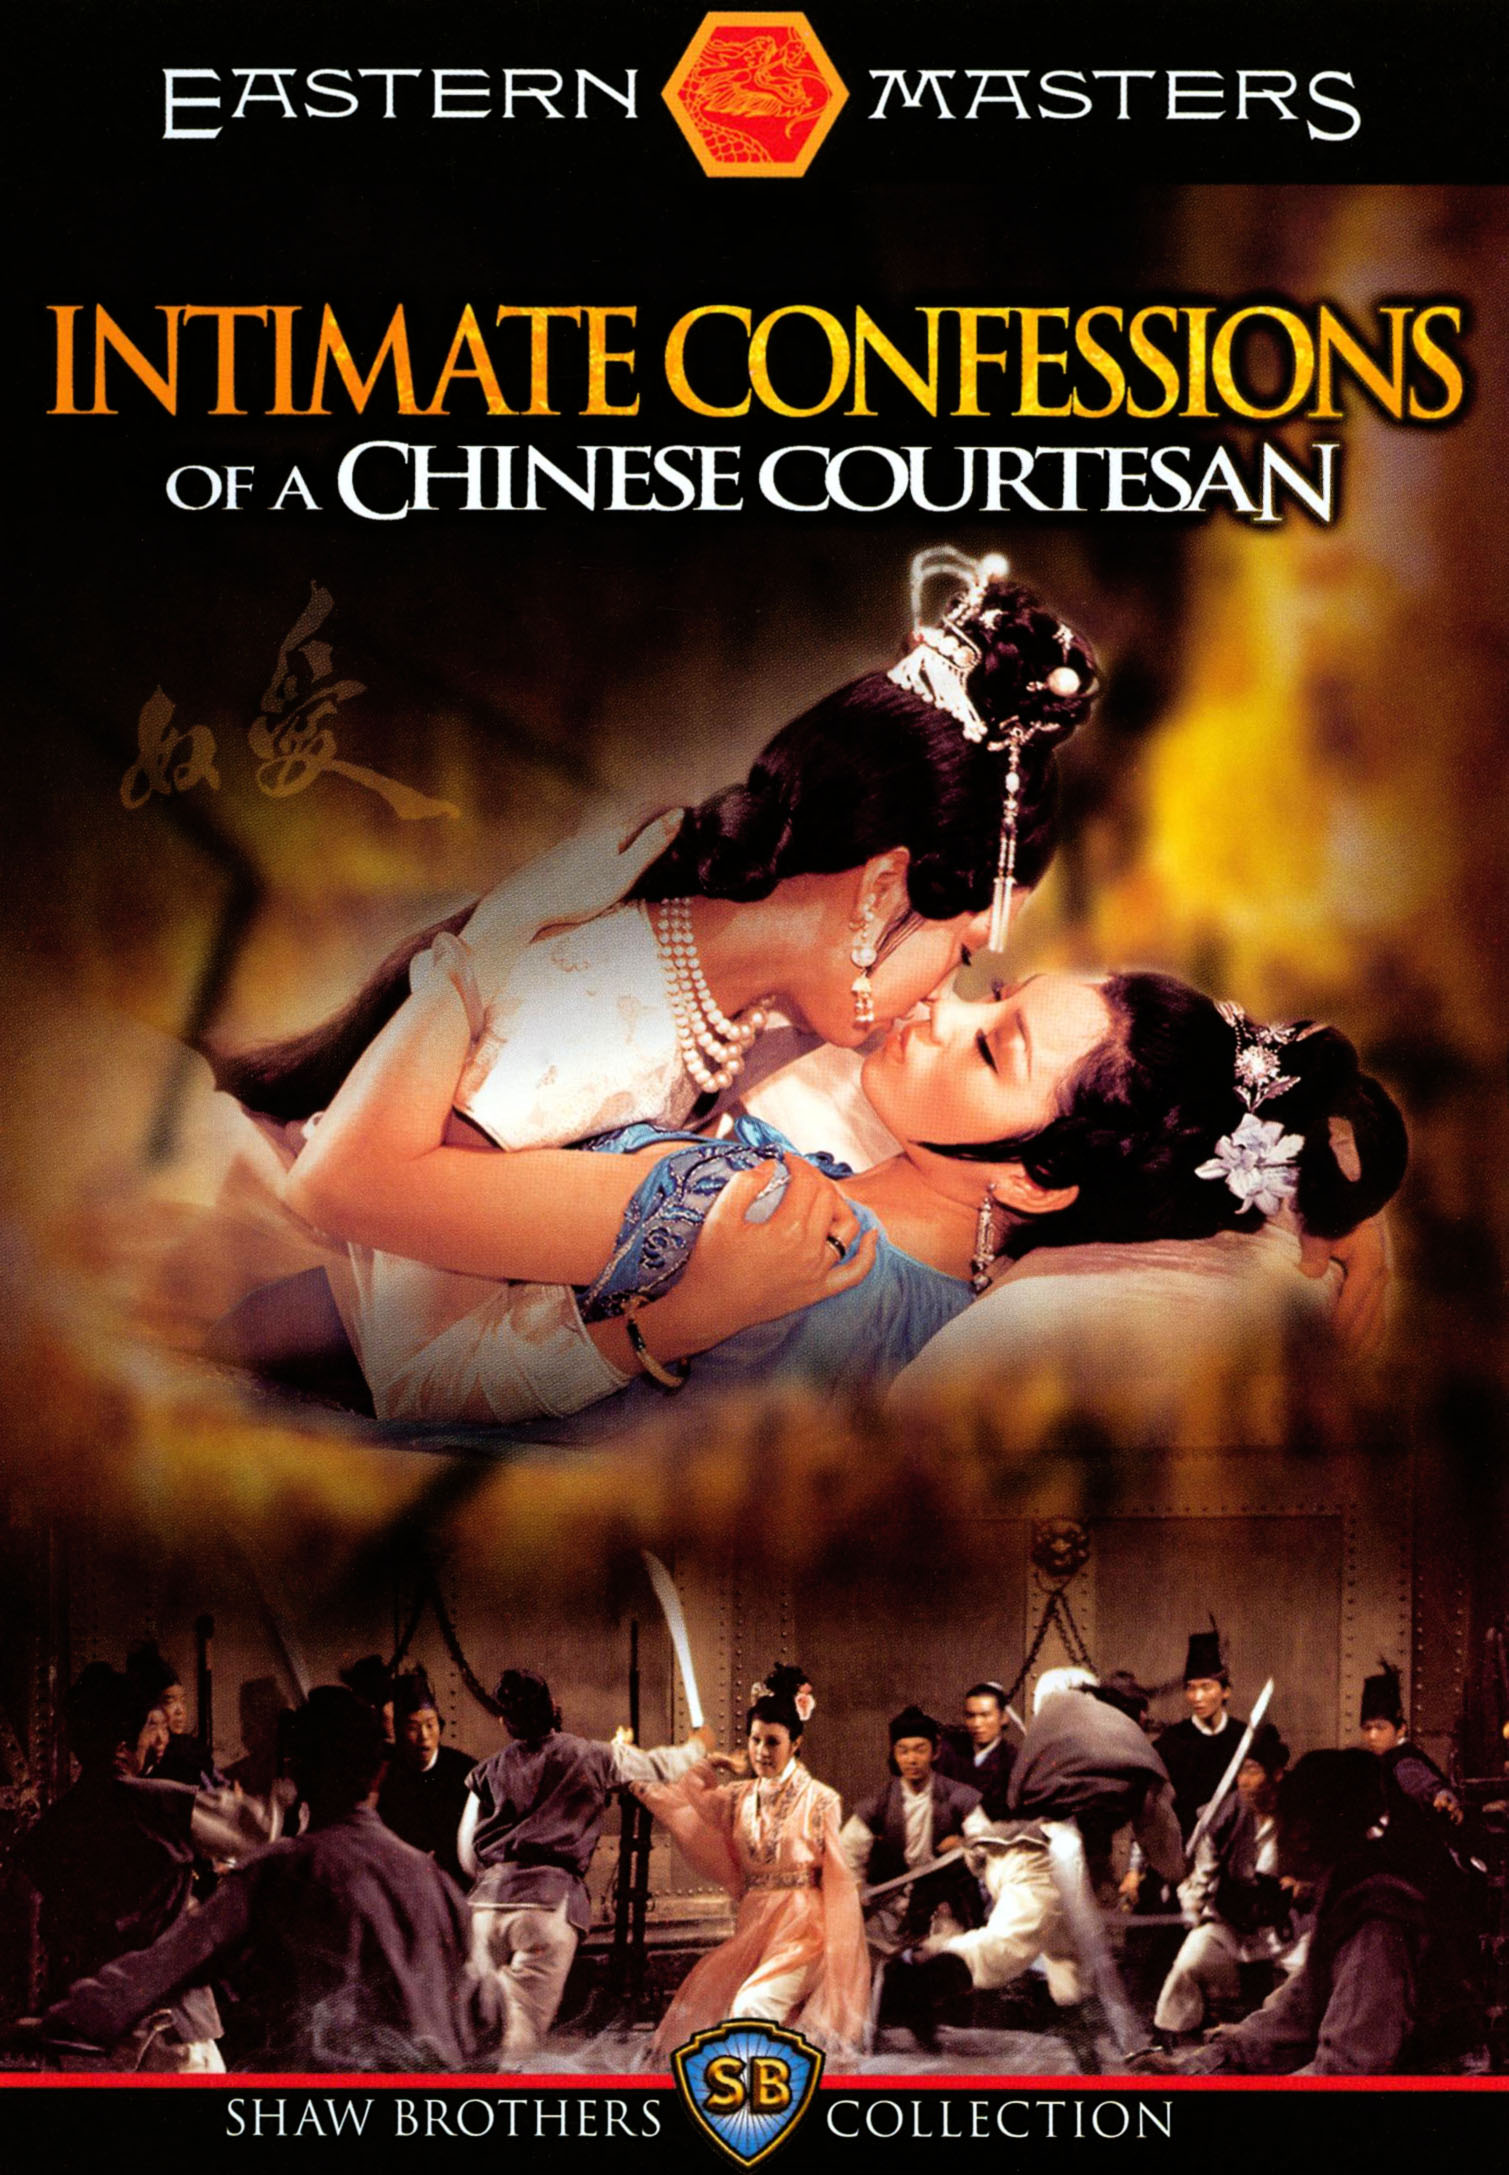 INTIMATE CONFESSIONS OF A CHINESE COURTESAN DISCUSSION 